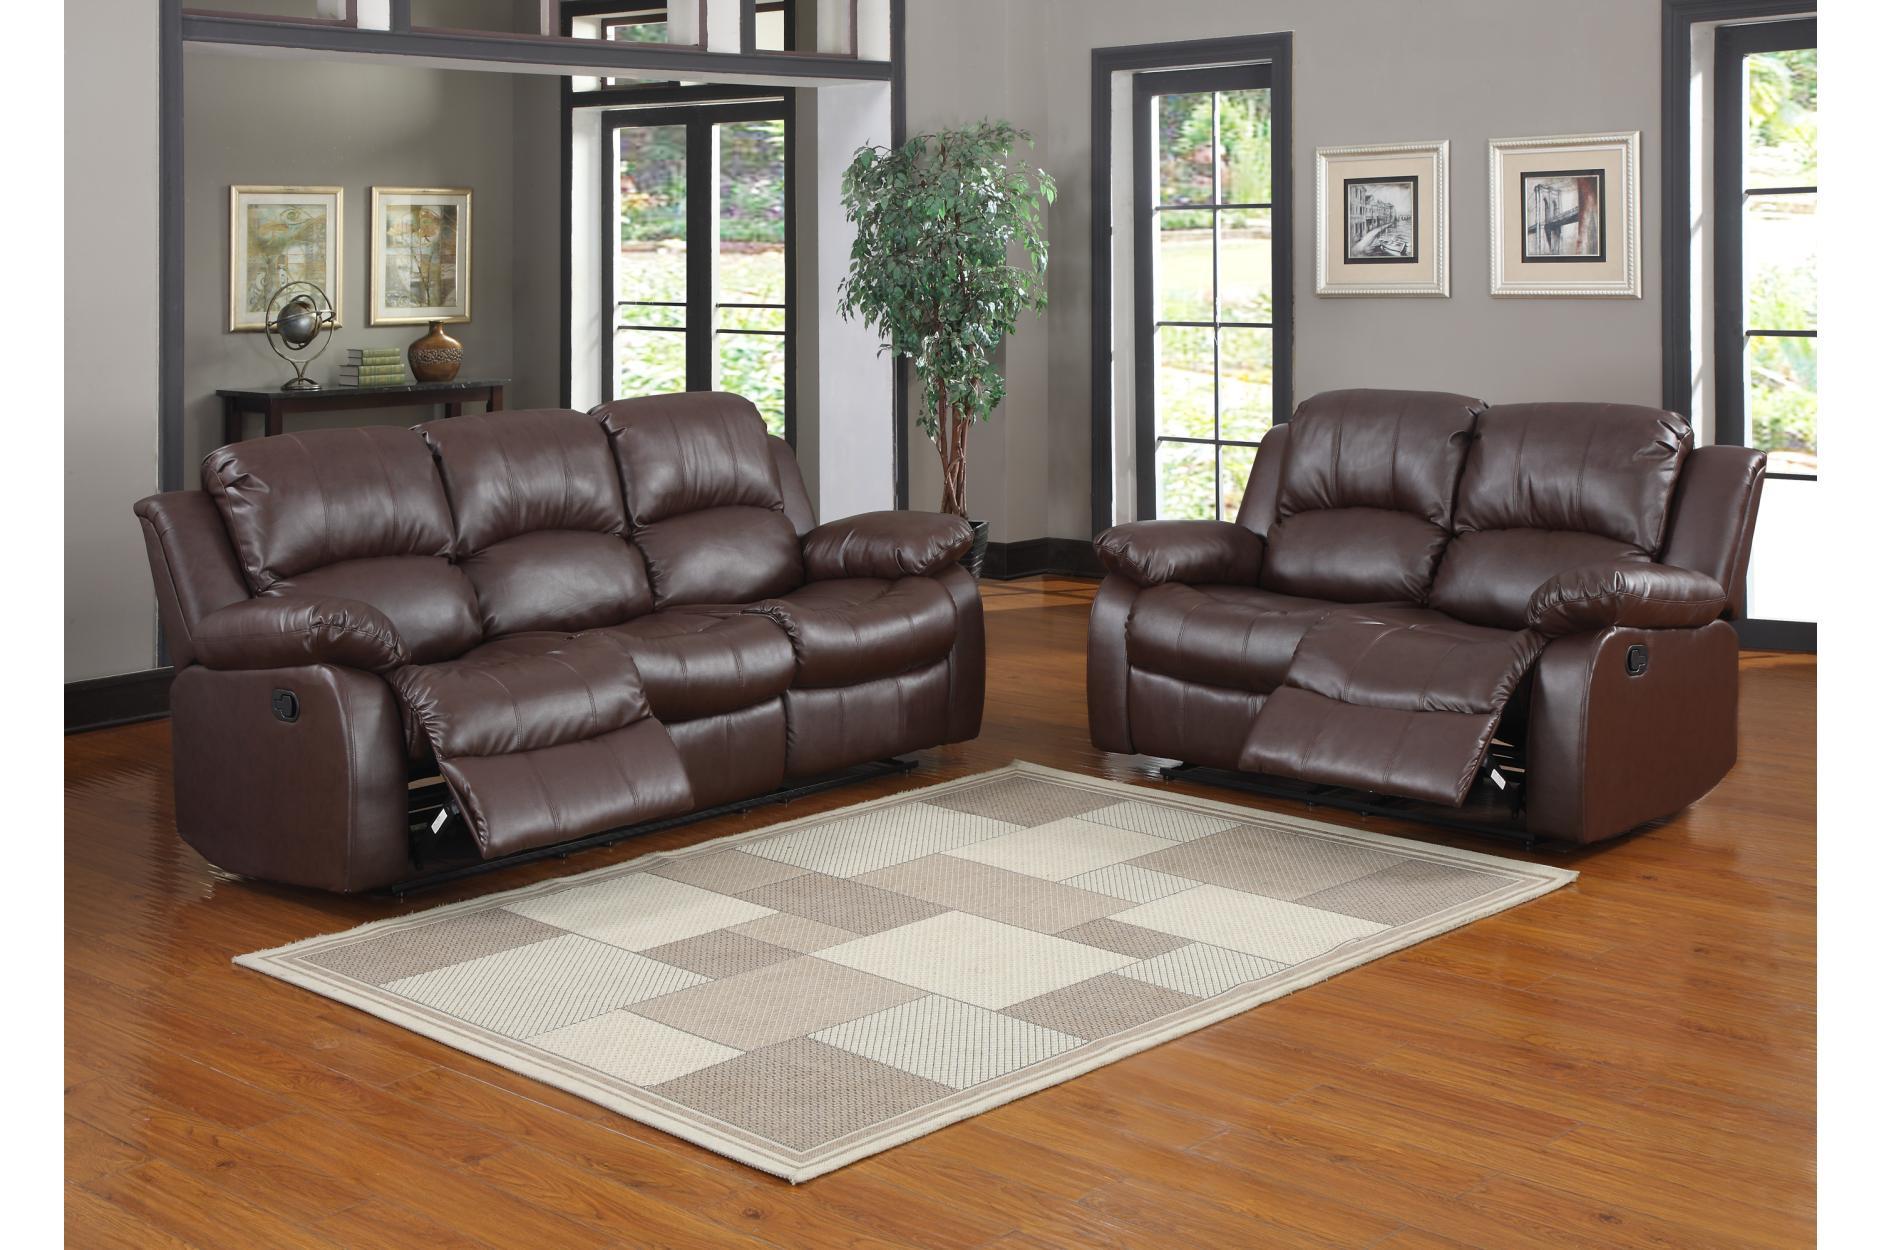 Contemporary, Modern Reclining Set Granley Granley 9700BRW-SL-Set-2 in Brown Bonded Leather